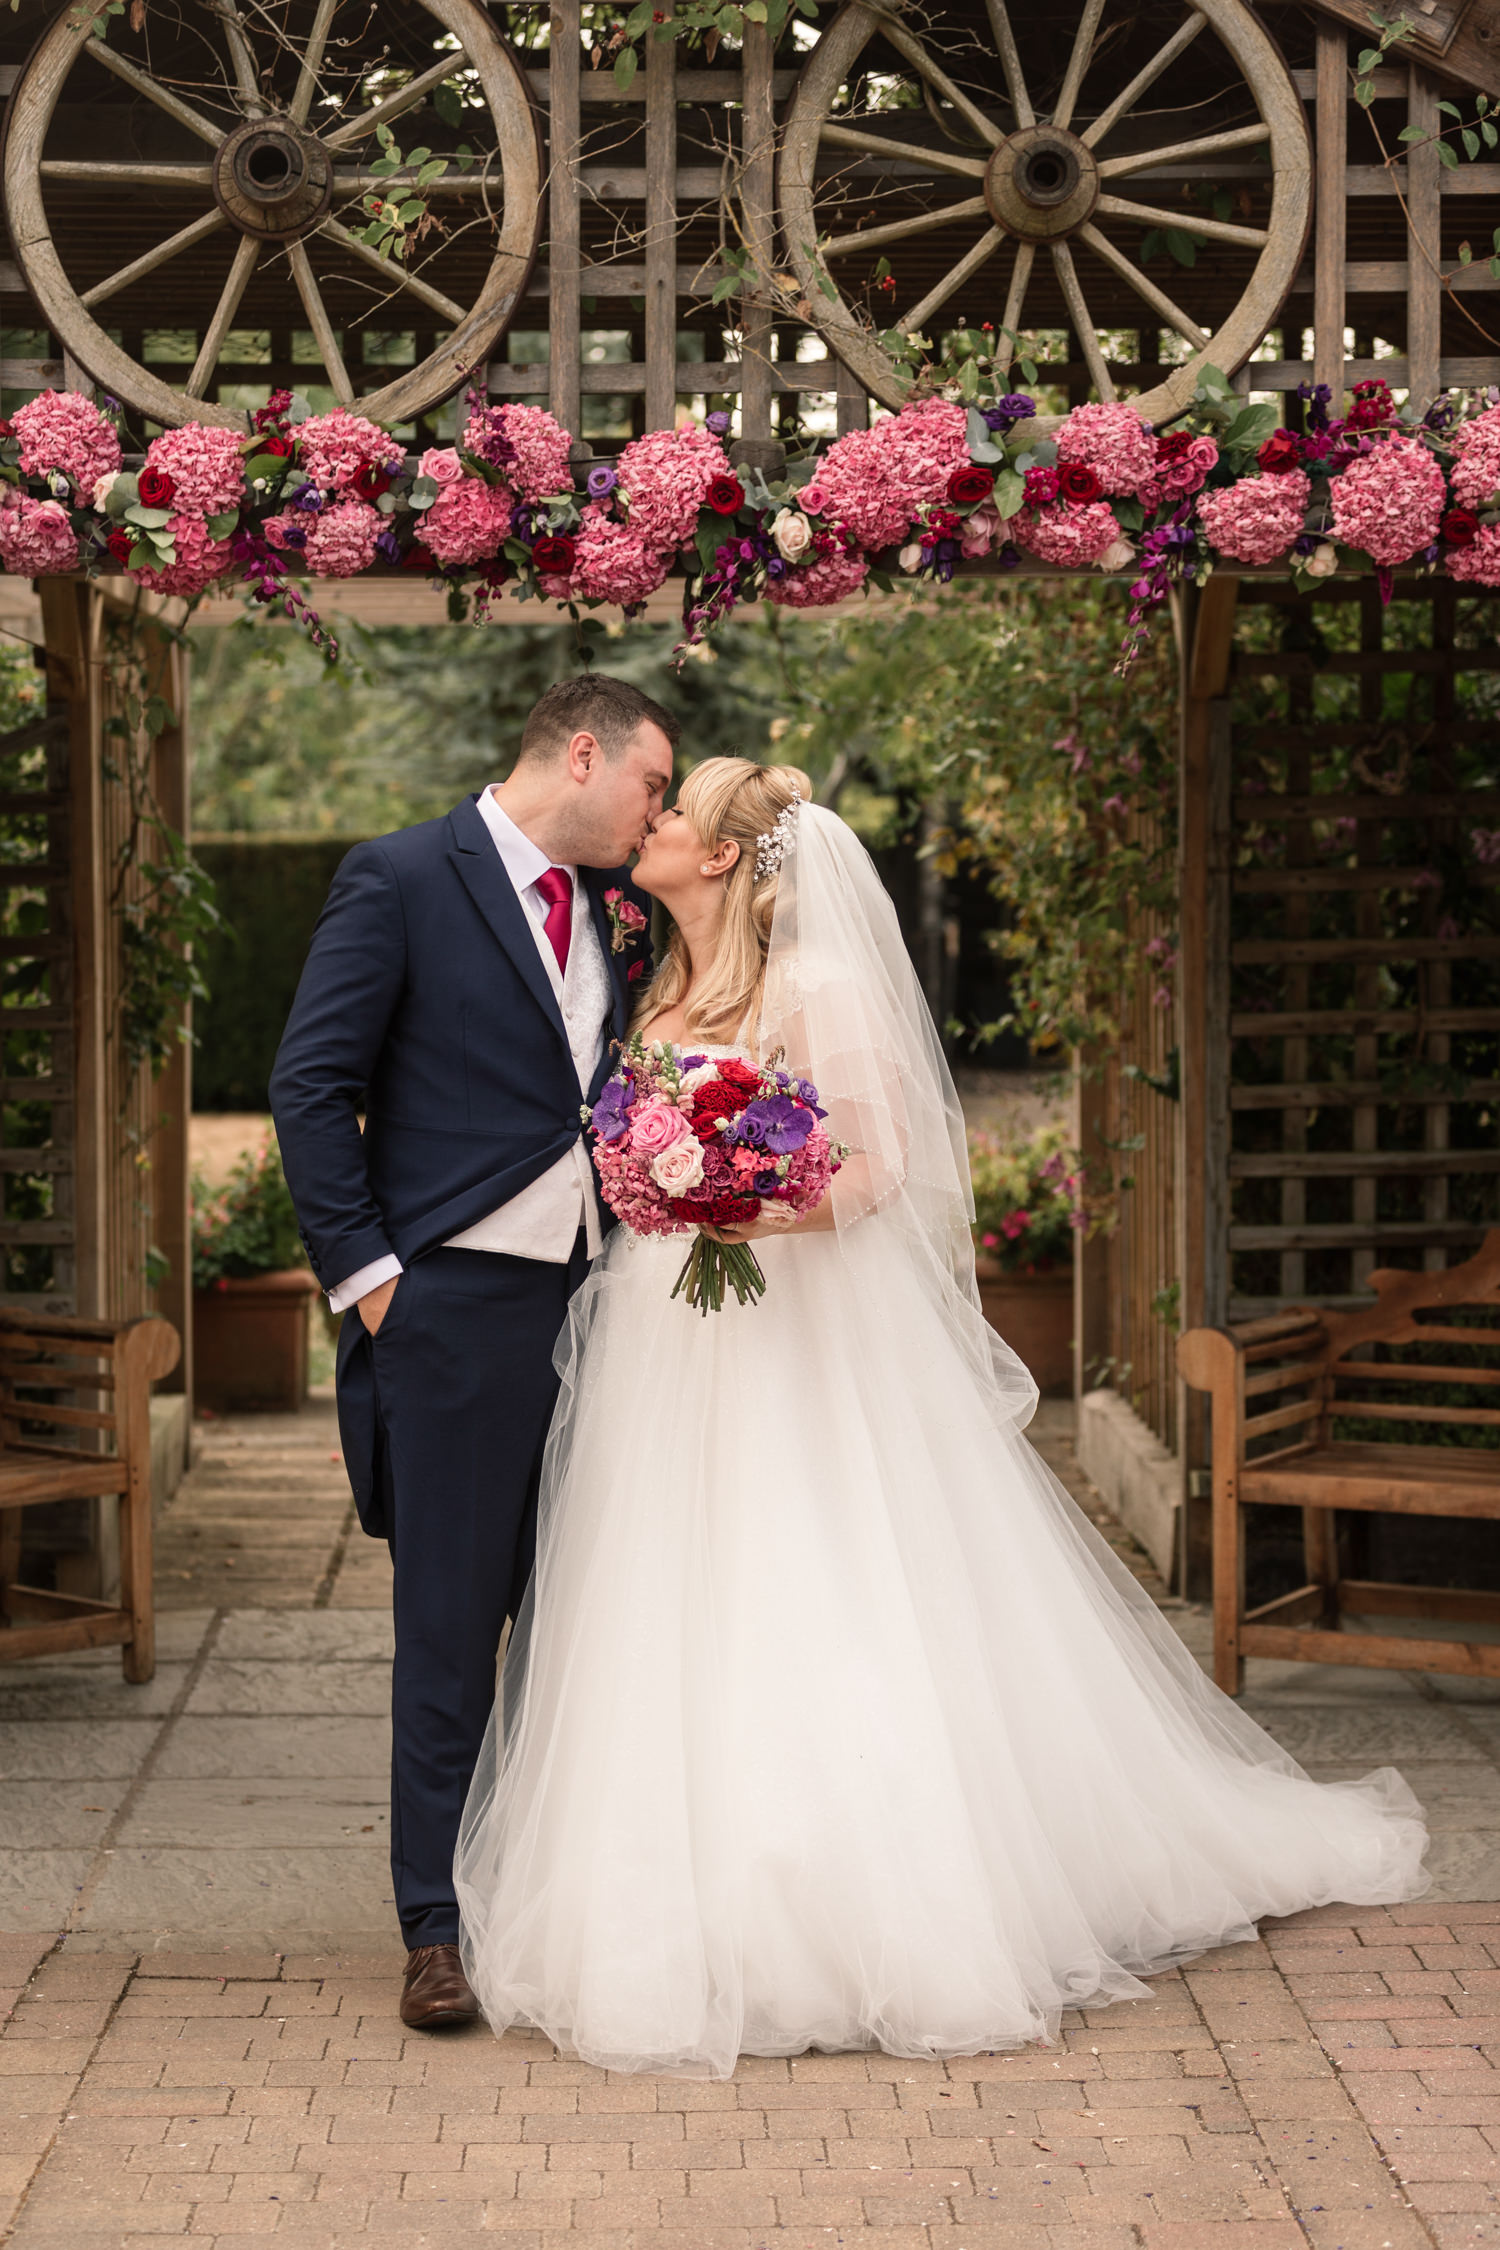 Flower filled summer wedding with pink hydrangeas, photo credit Becky Harley Photography (42)